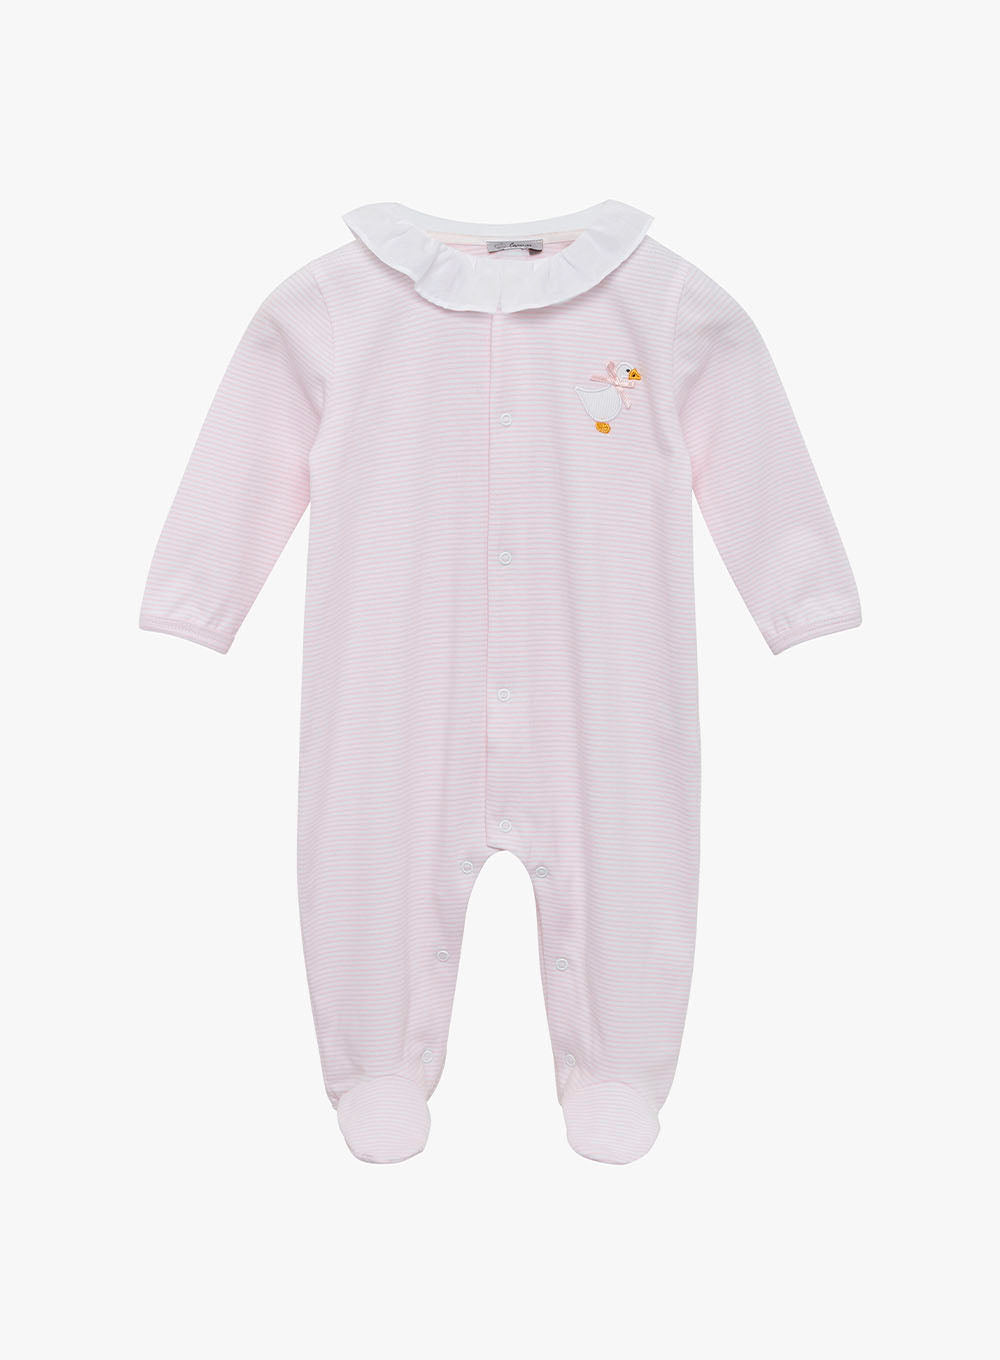 Baby Jemima Duck All-in-One Sleepsuit in Pink | Trotters